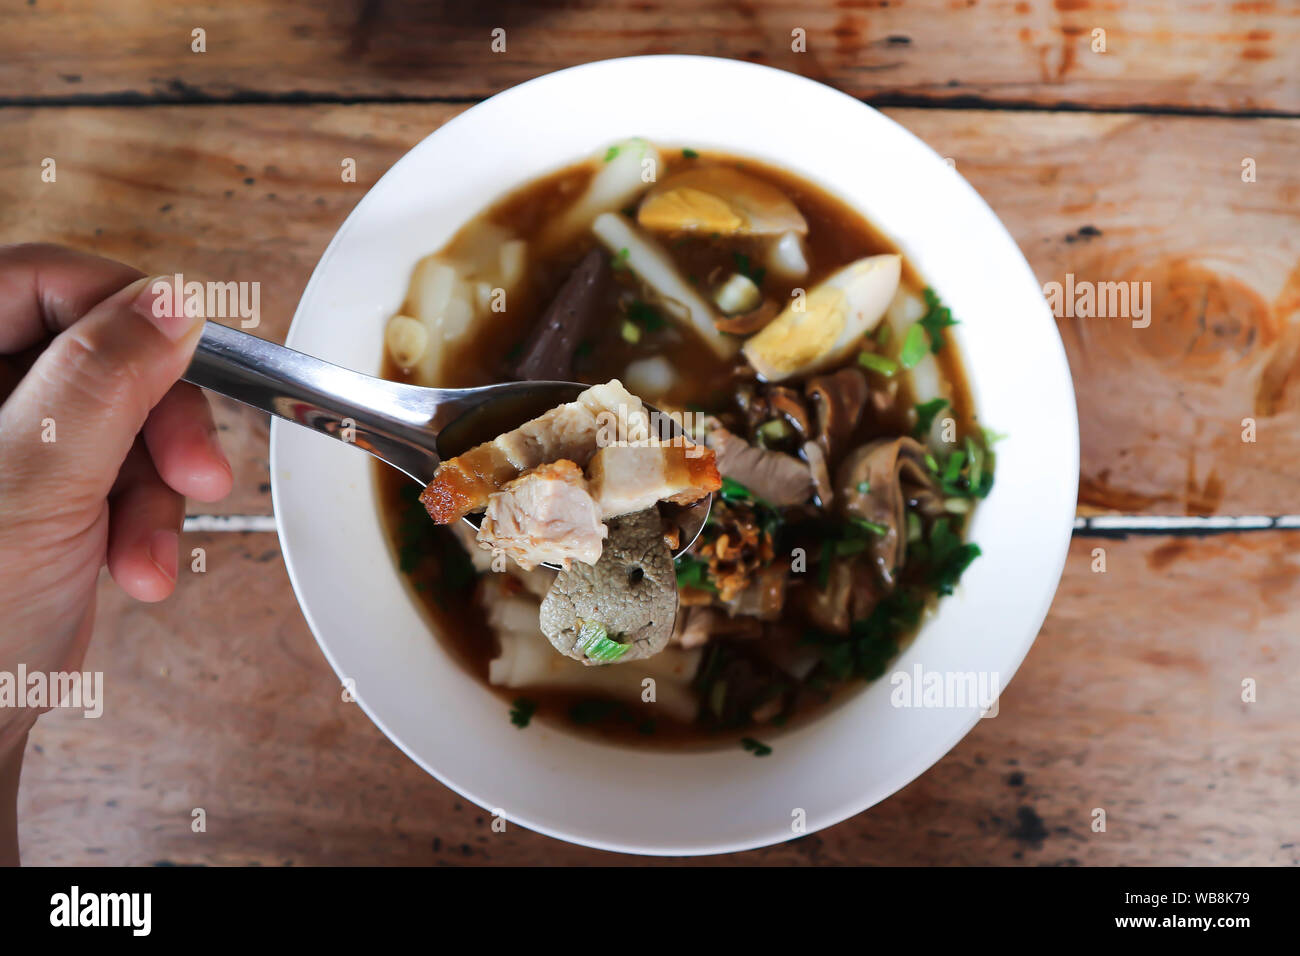 eating noodle, Chinese noodle or pork and egg noodle Stock Photo